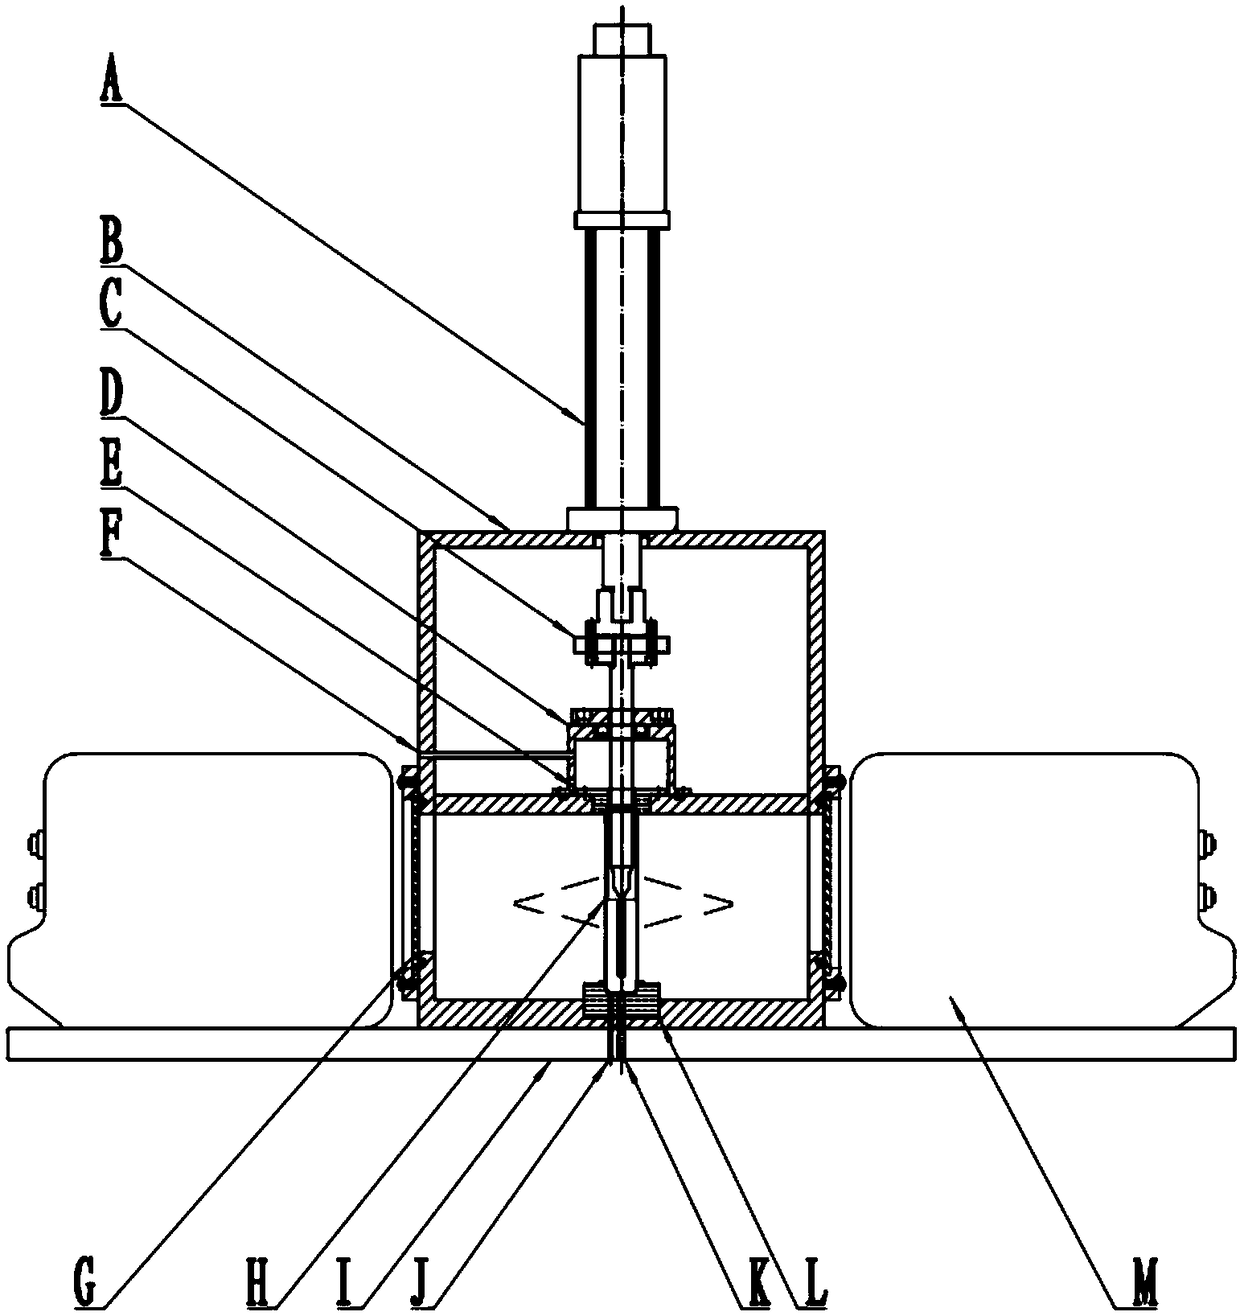 Measuring system for radial deformation of nuclear fuel cladding tube under high temperature iodine vapor environment